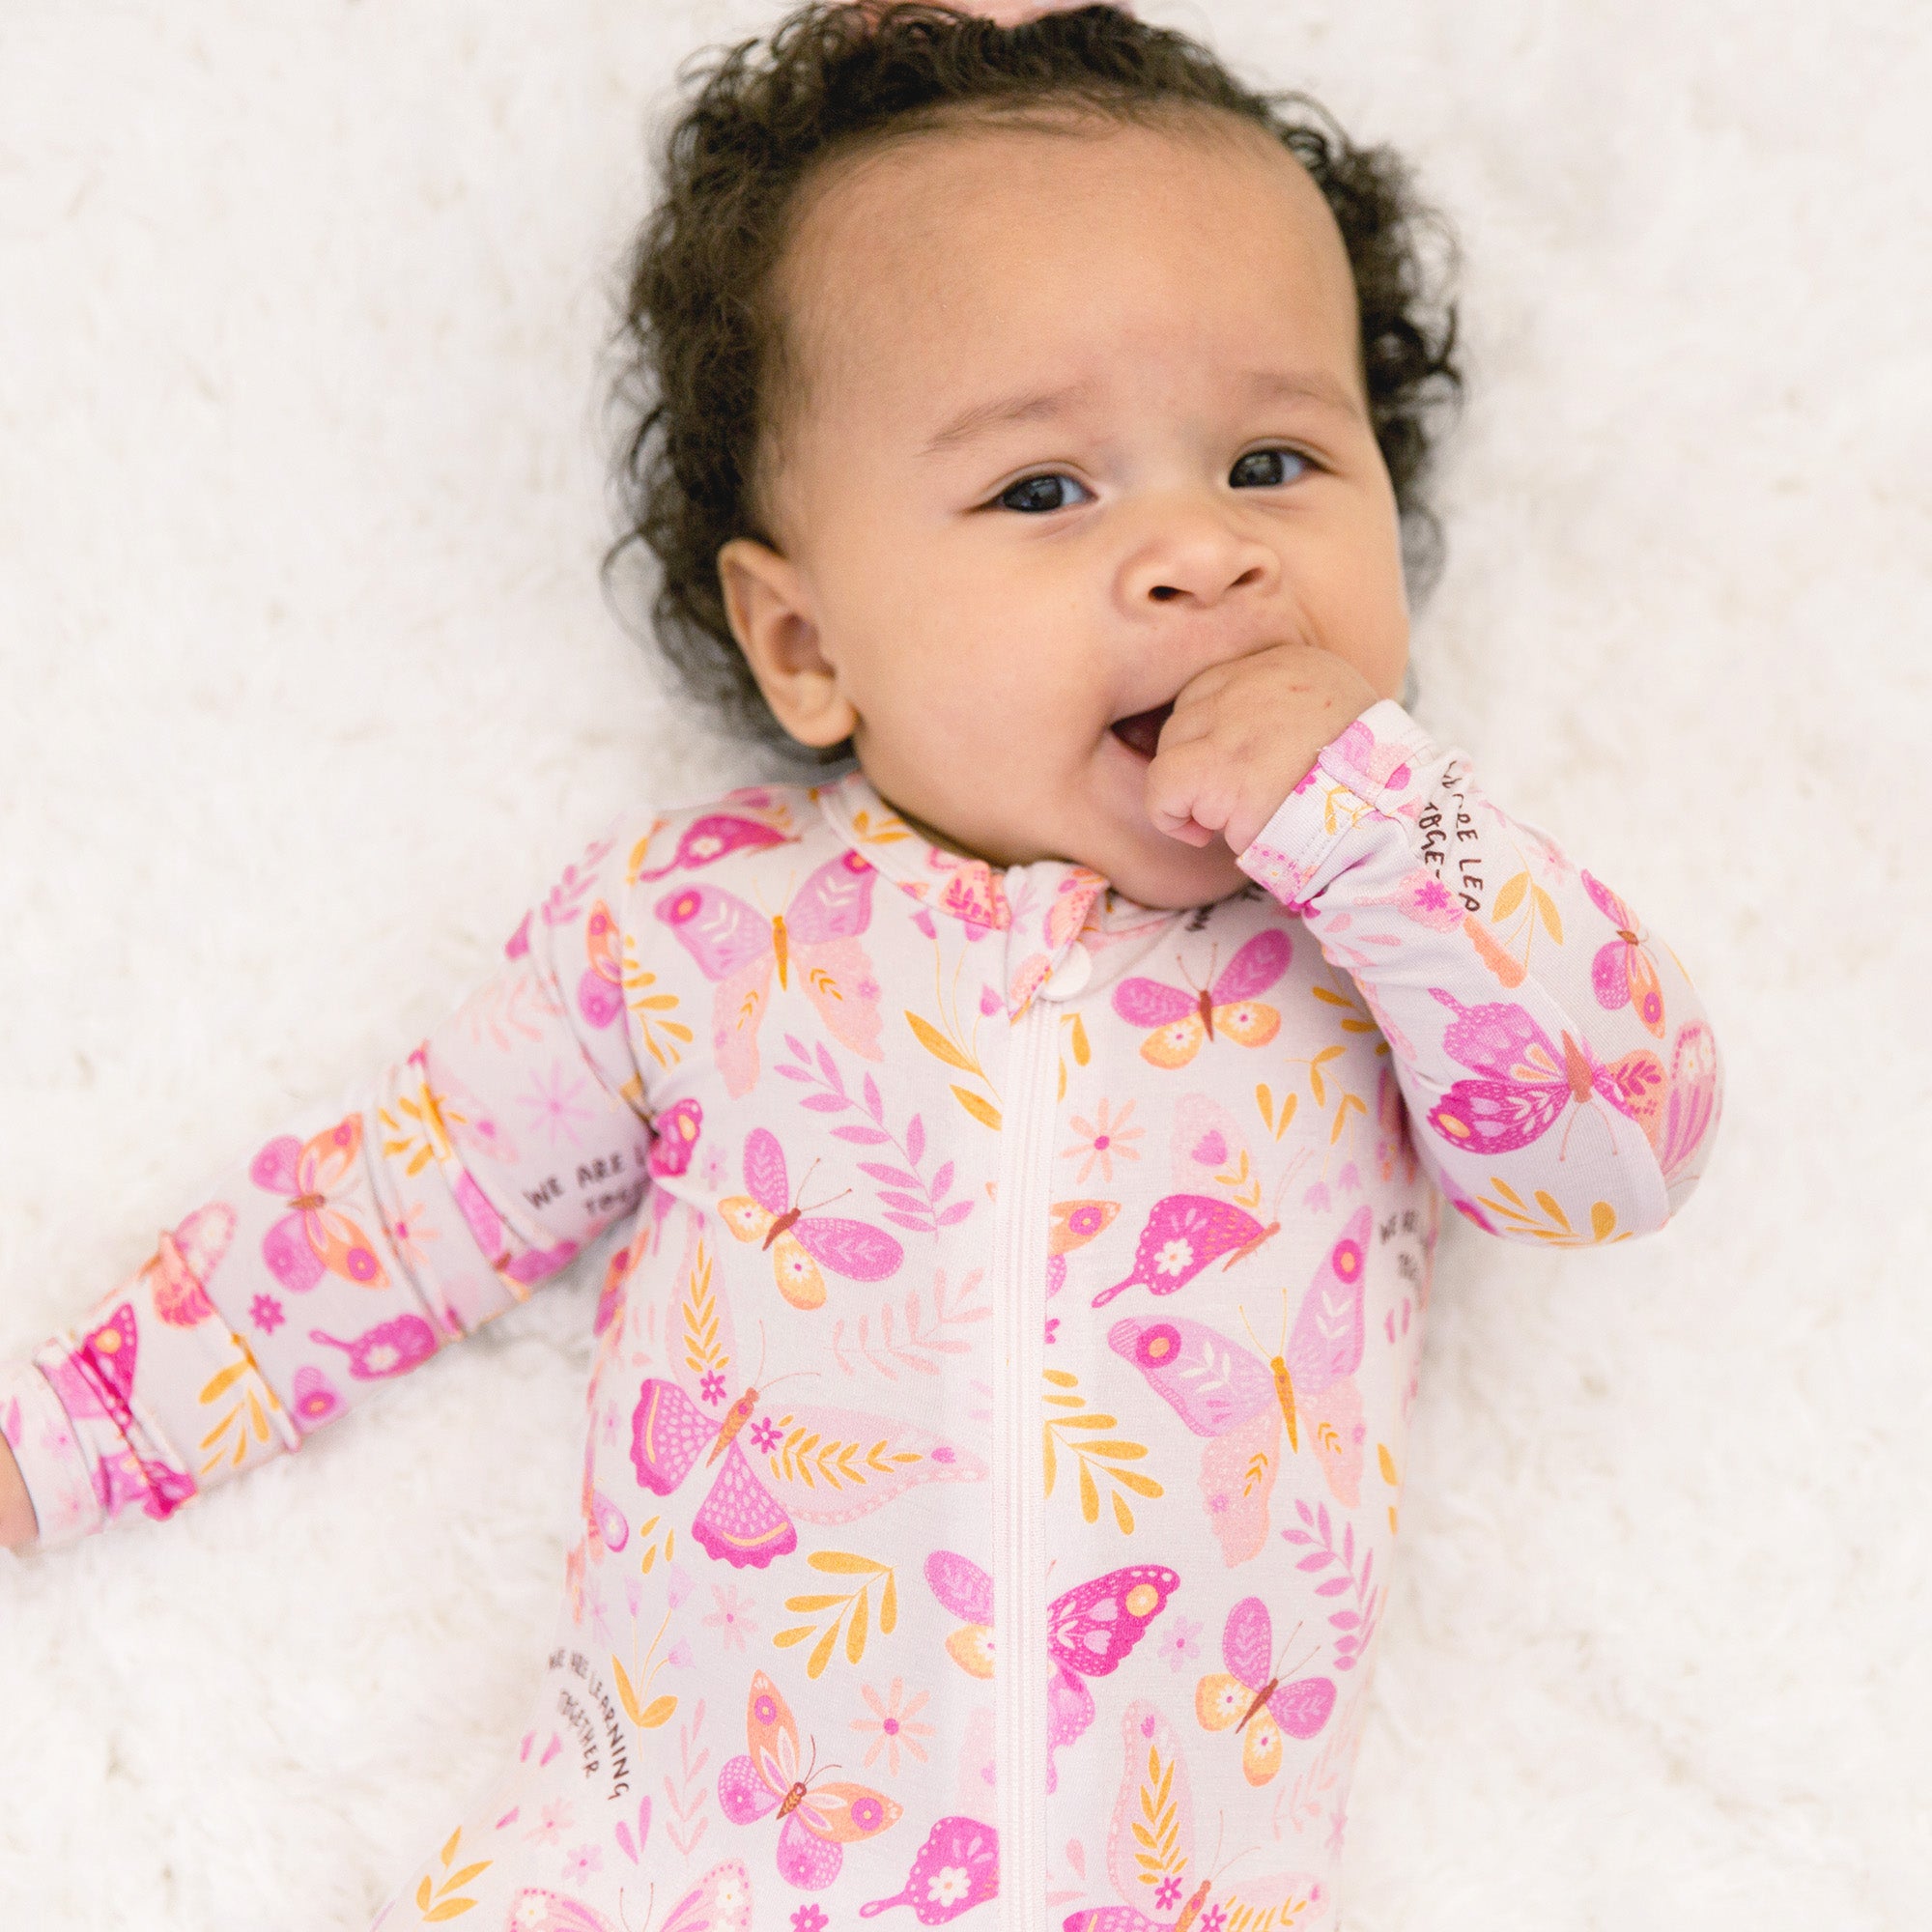 Footie Bamboo Baby Zipper Pajamas, Pink Butterflies, Double-Zipper Onesies for Baby Girl, 4-Way Stretch, Easy On & Off - "We Are Learning Together" - Raising Mama